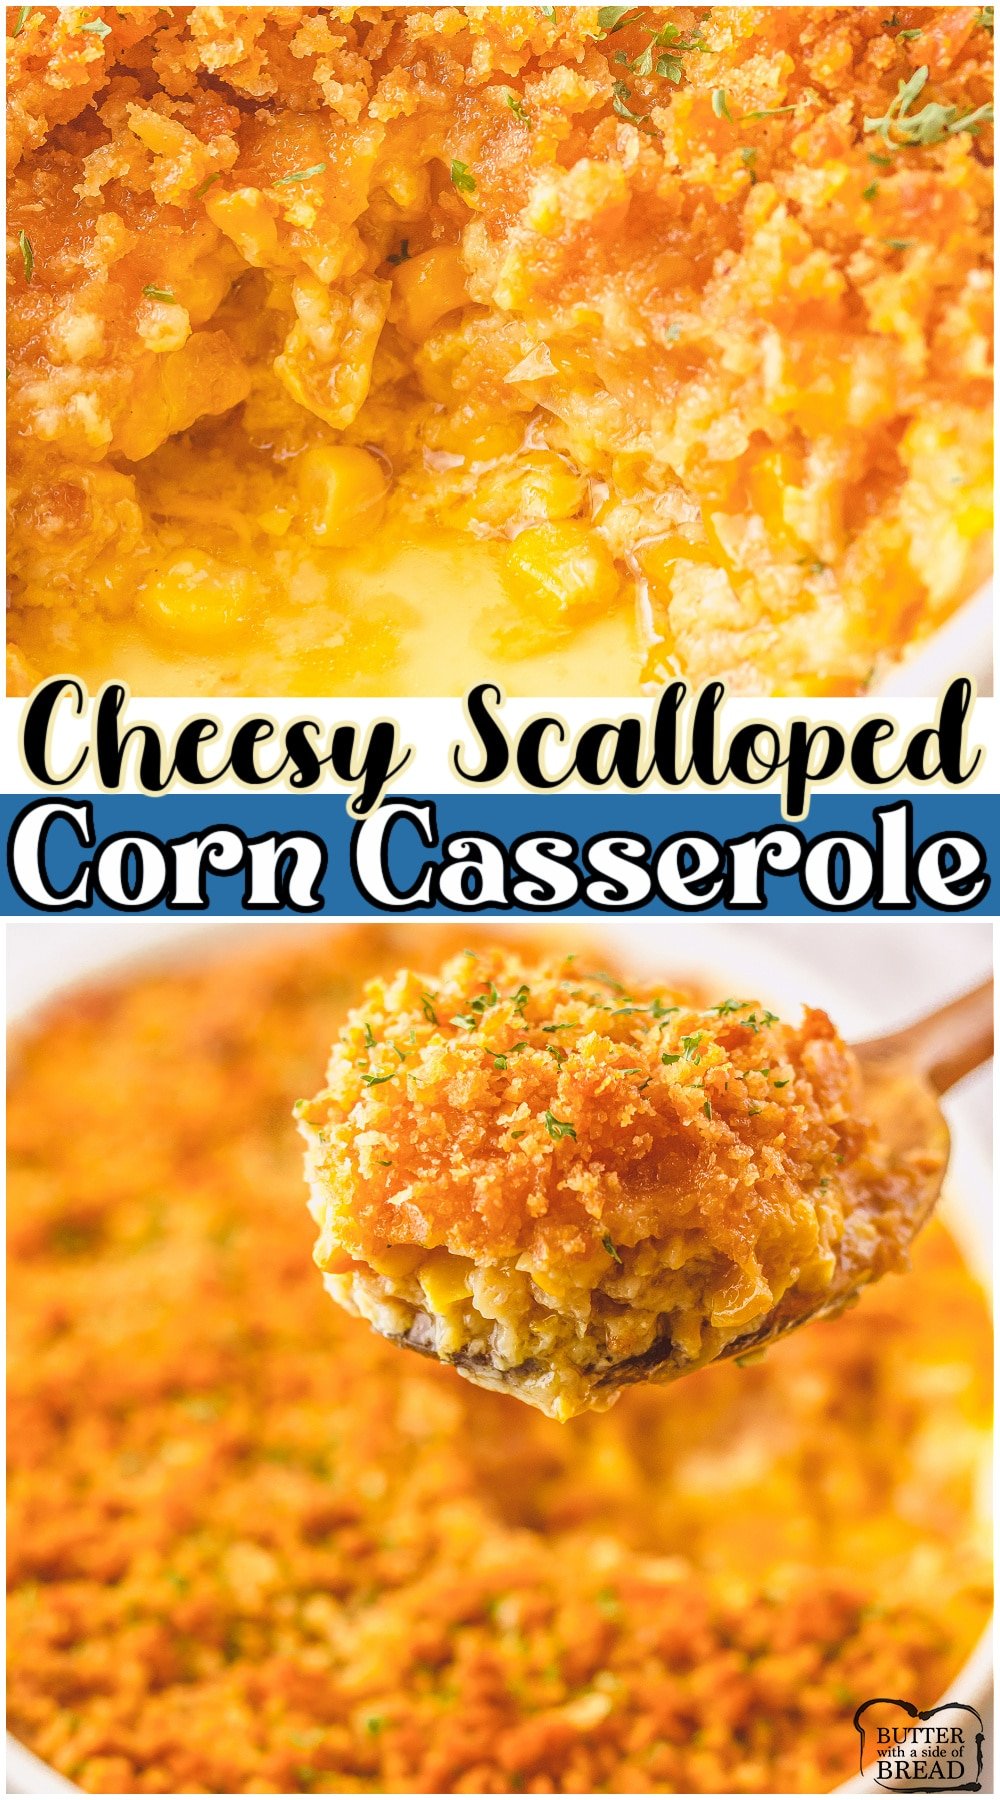 Scalloped Corn Casserole is an easy side dish made with corn, eggs, cheese, butter & Ritz crackers. Perfect savory corn side that goes well with holiday dinners! 